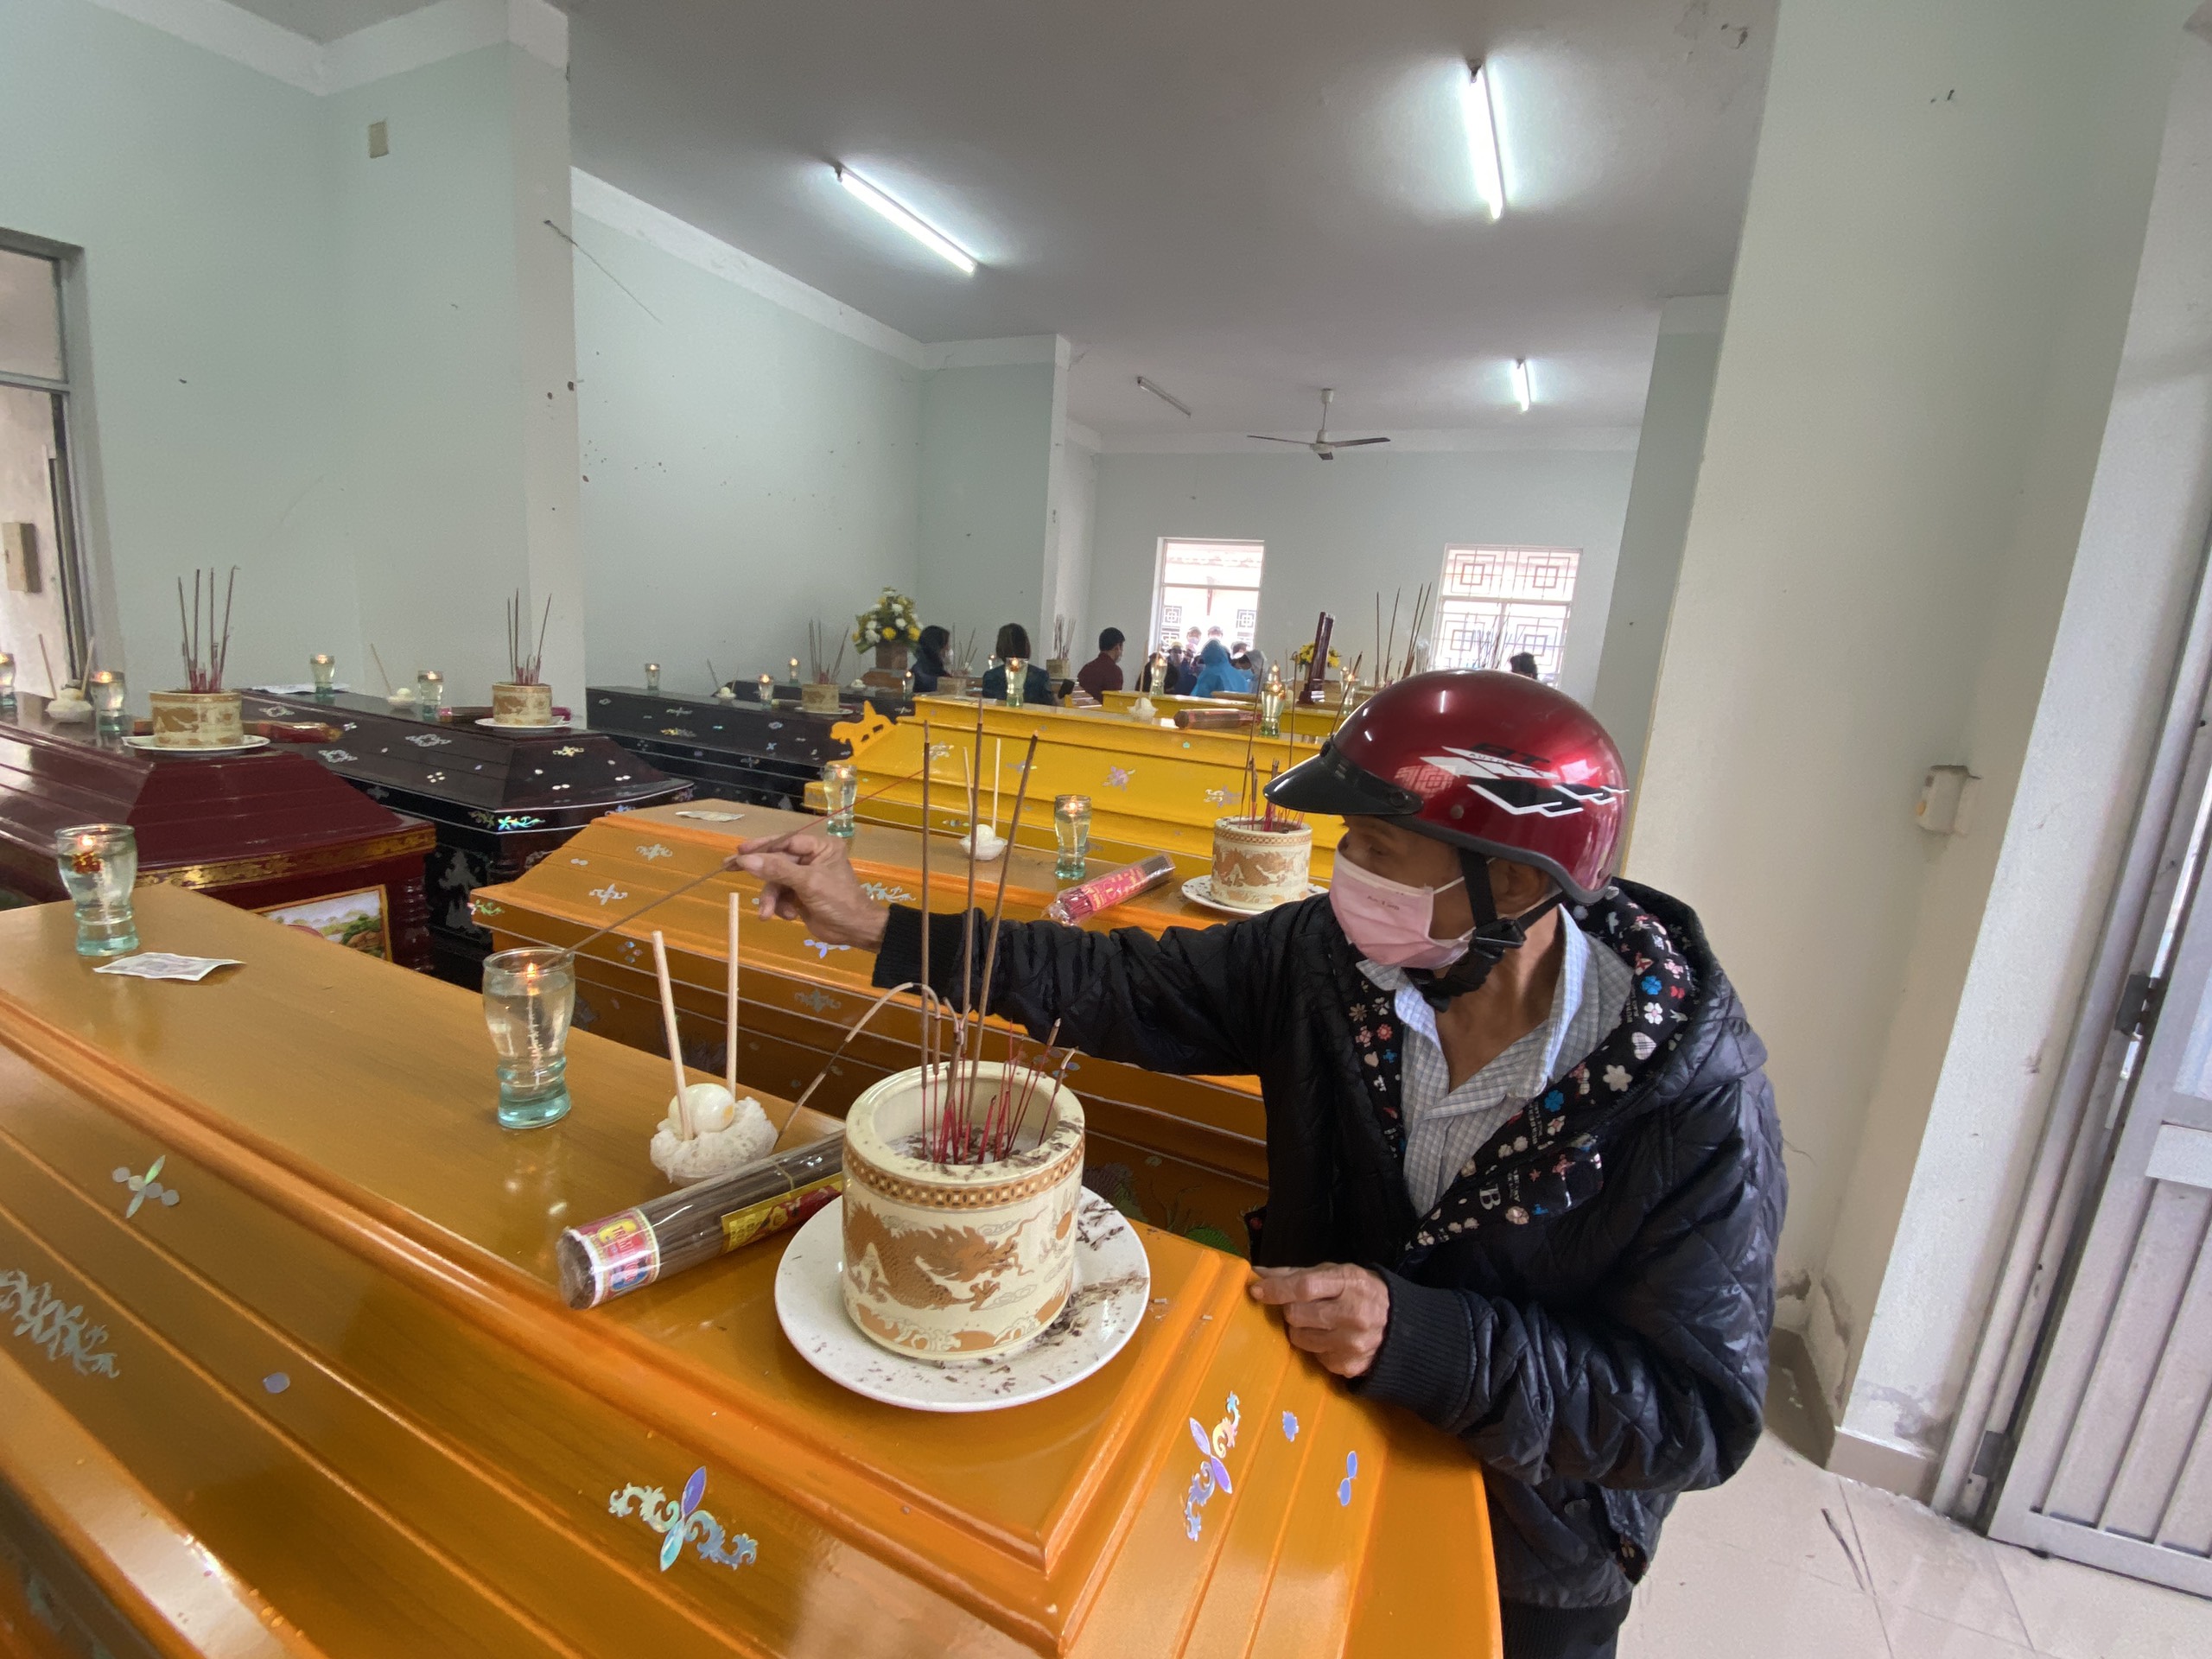 The deceased victims are kept inside coffins at a funeral house in Hoi An City, Quang Nam Province, February 27, 2022. Photo: Le Trung / Tuoi Tre